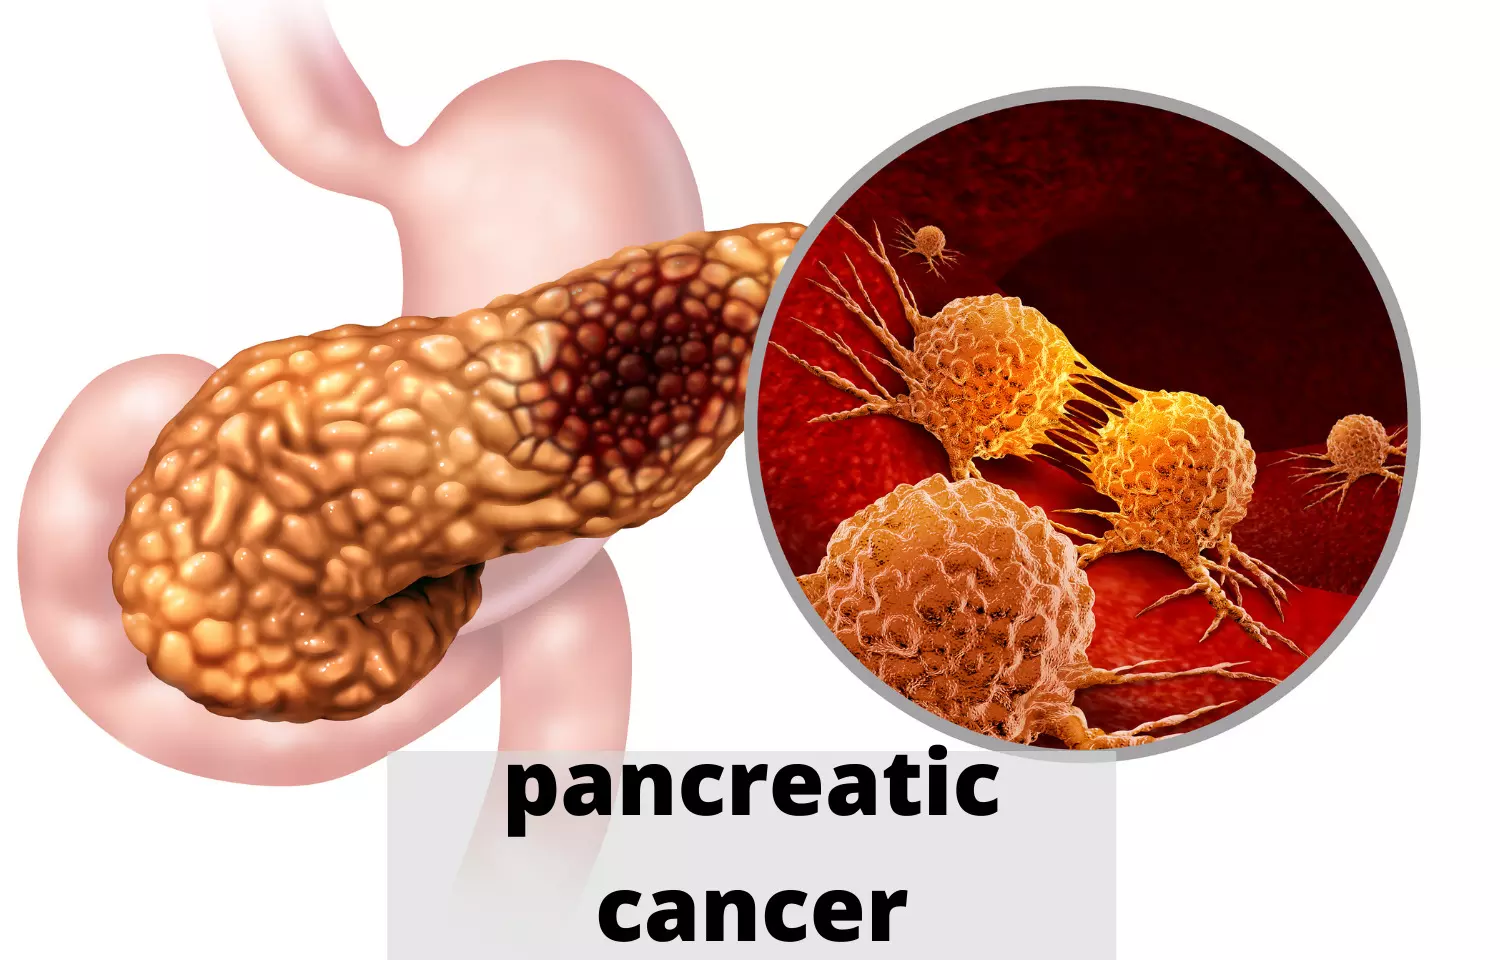 New guidelines for pancreatic cancer screening released